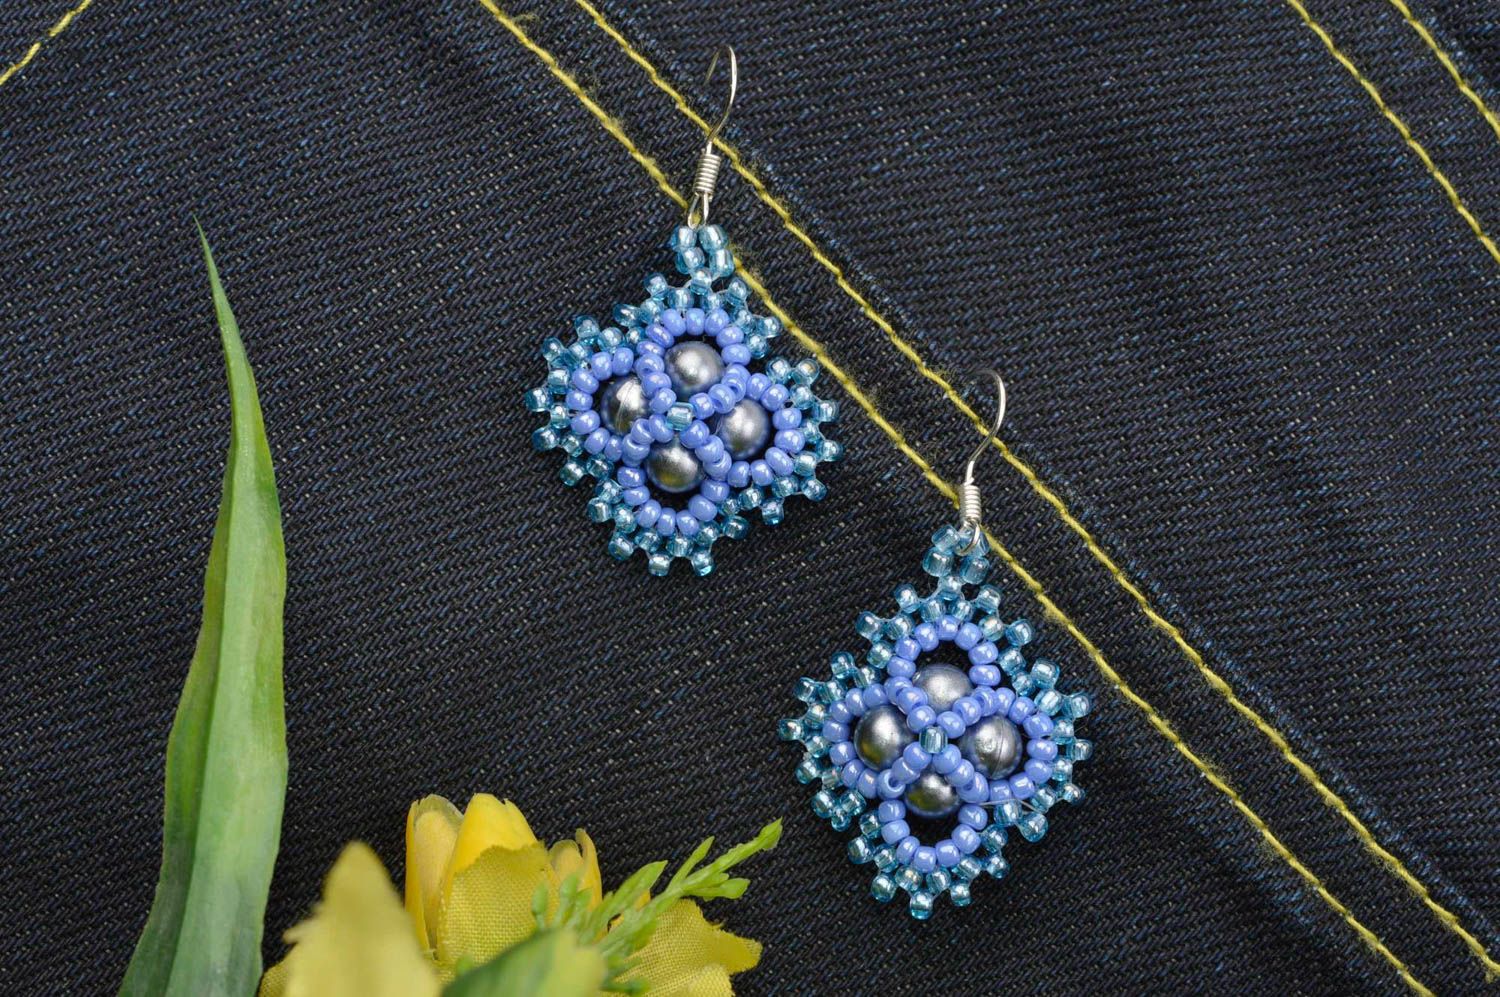 Fashion bijouterie handmade earrings with charms designer earrings made of beads photo 1